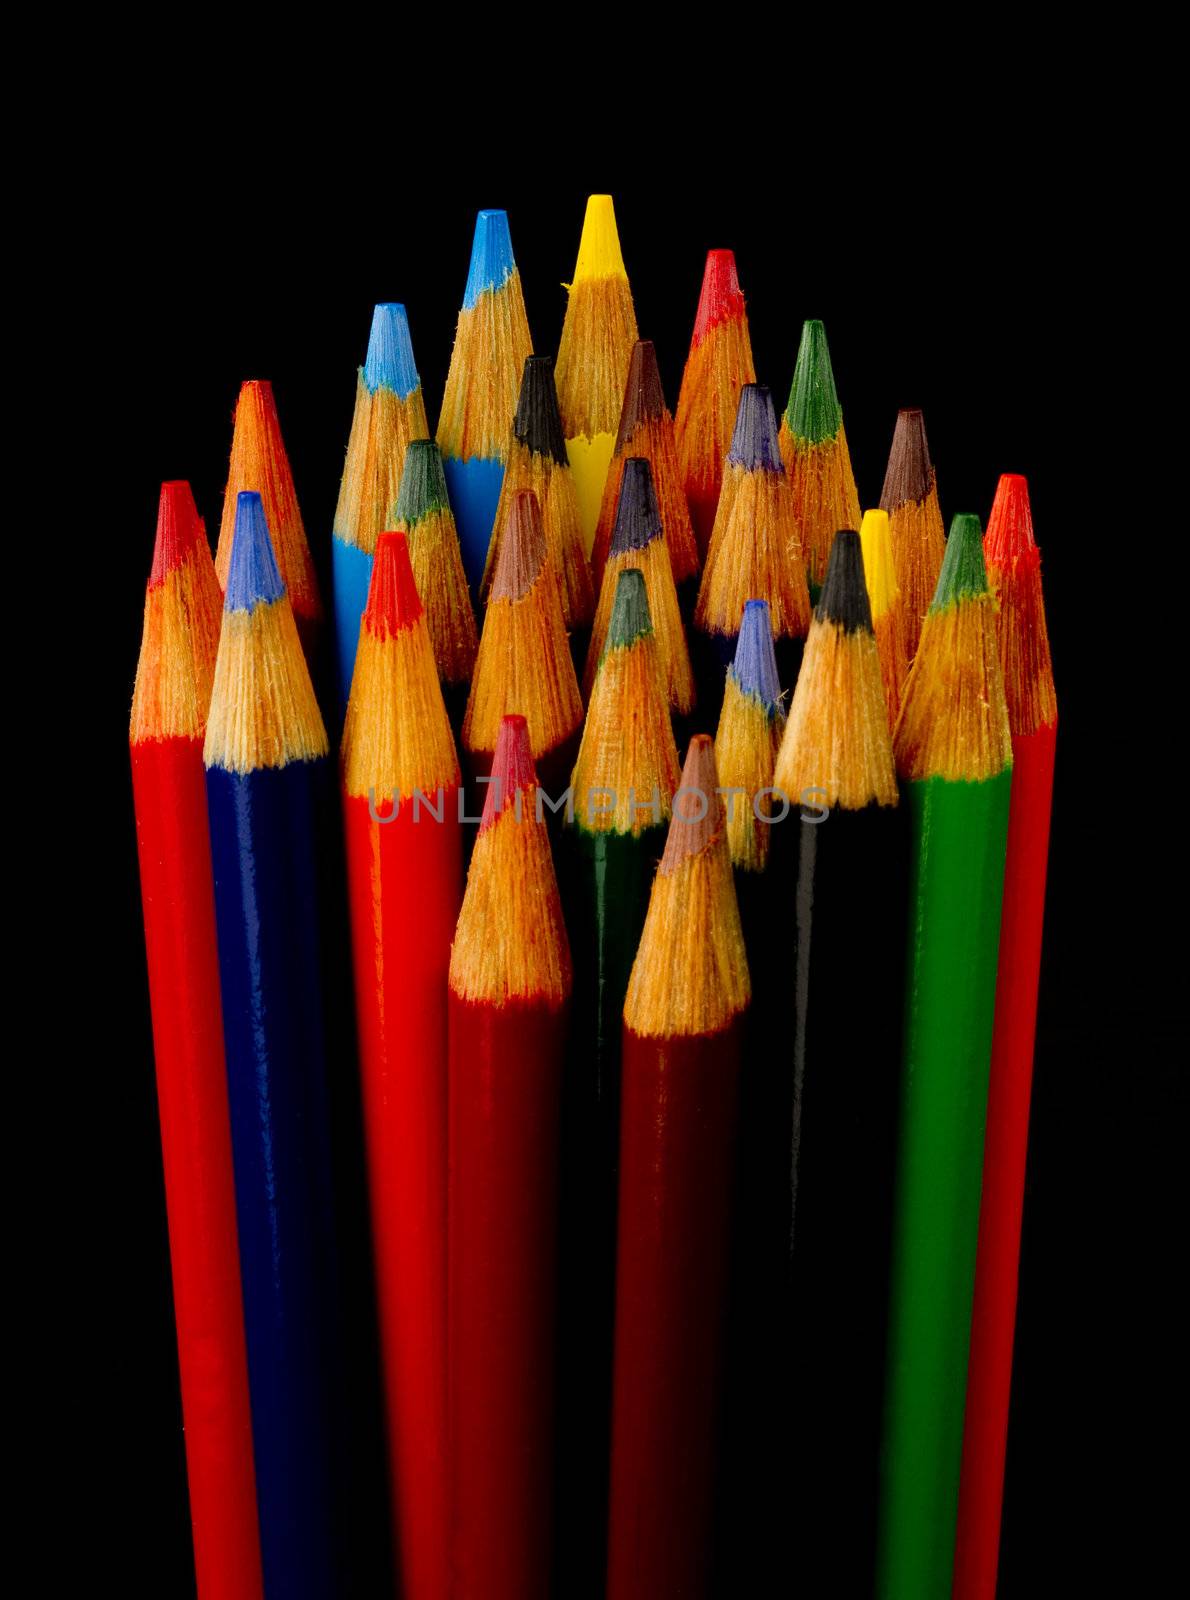 Art Supplies Color Pencils in A Group on Black by ChrisBoswell